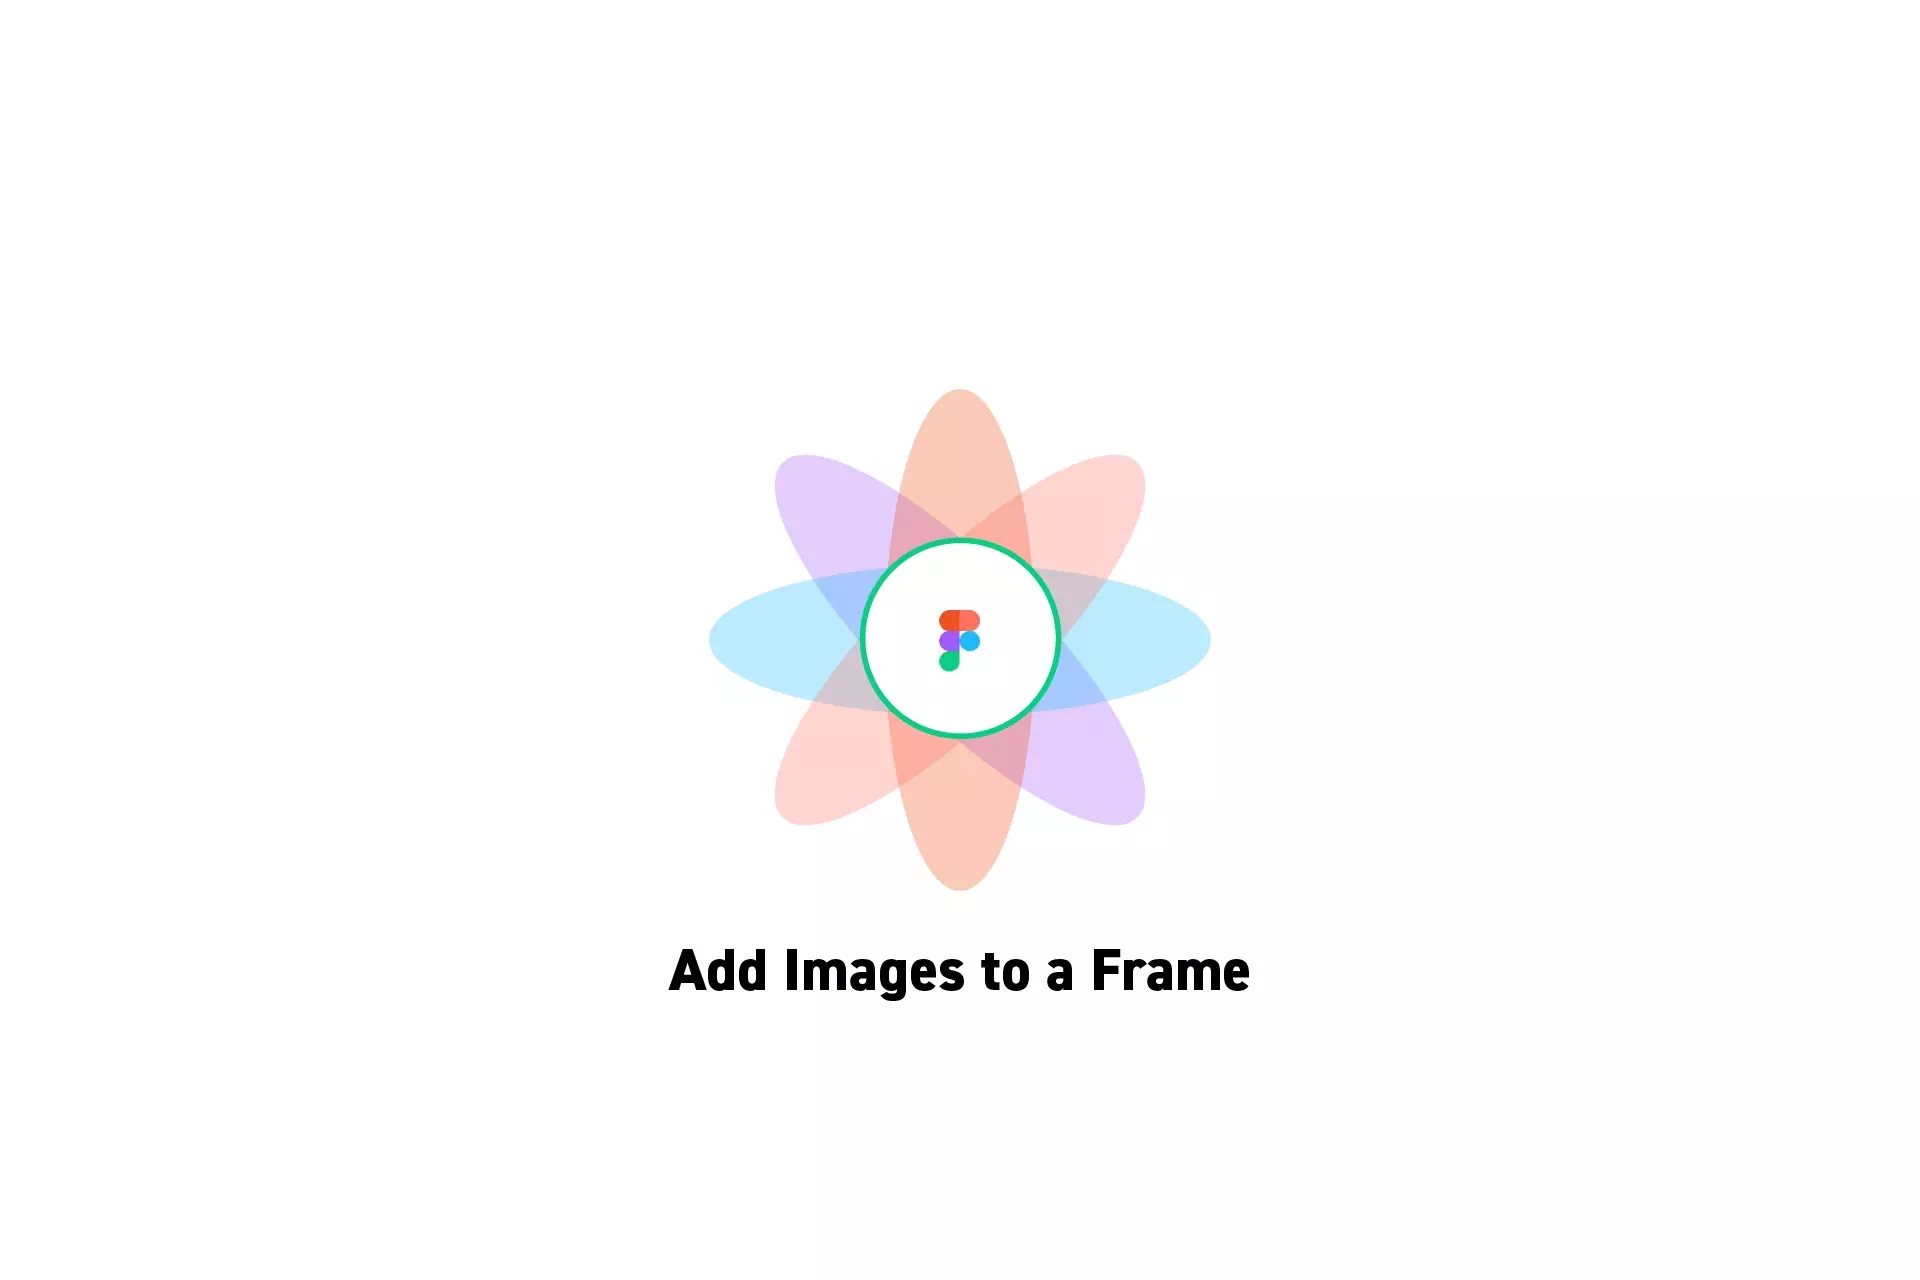 A flower that represents Figma with the text “Add Images to a Frame” beneath it.